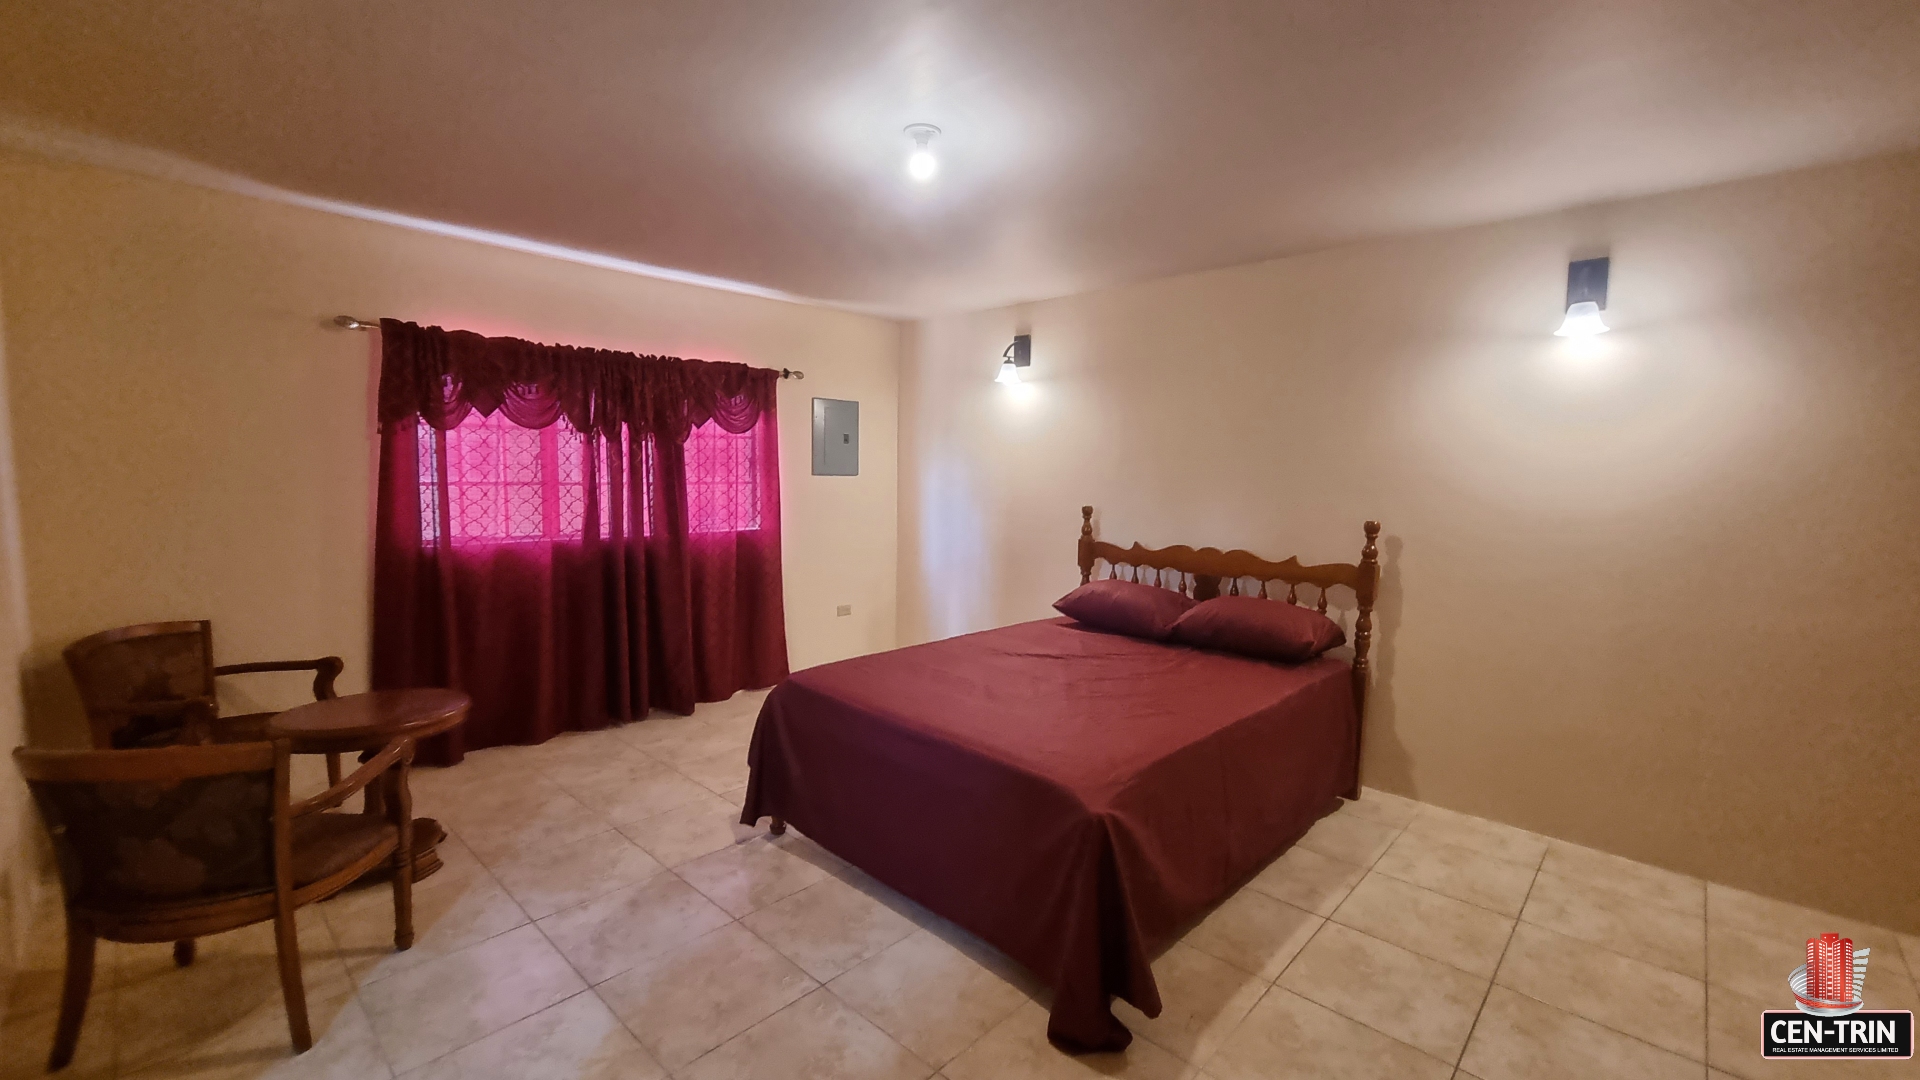 Master bedroom in townhouse for sale with a king-size bed, dresser, mirror, two windows, and a carpeted floor.